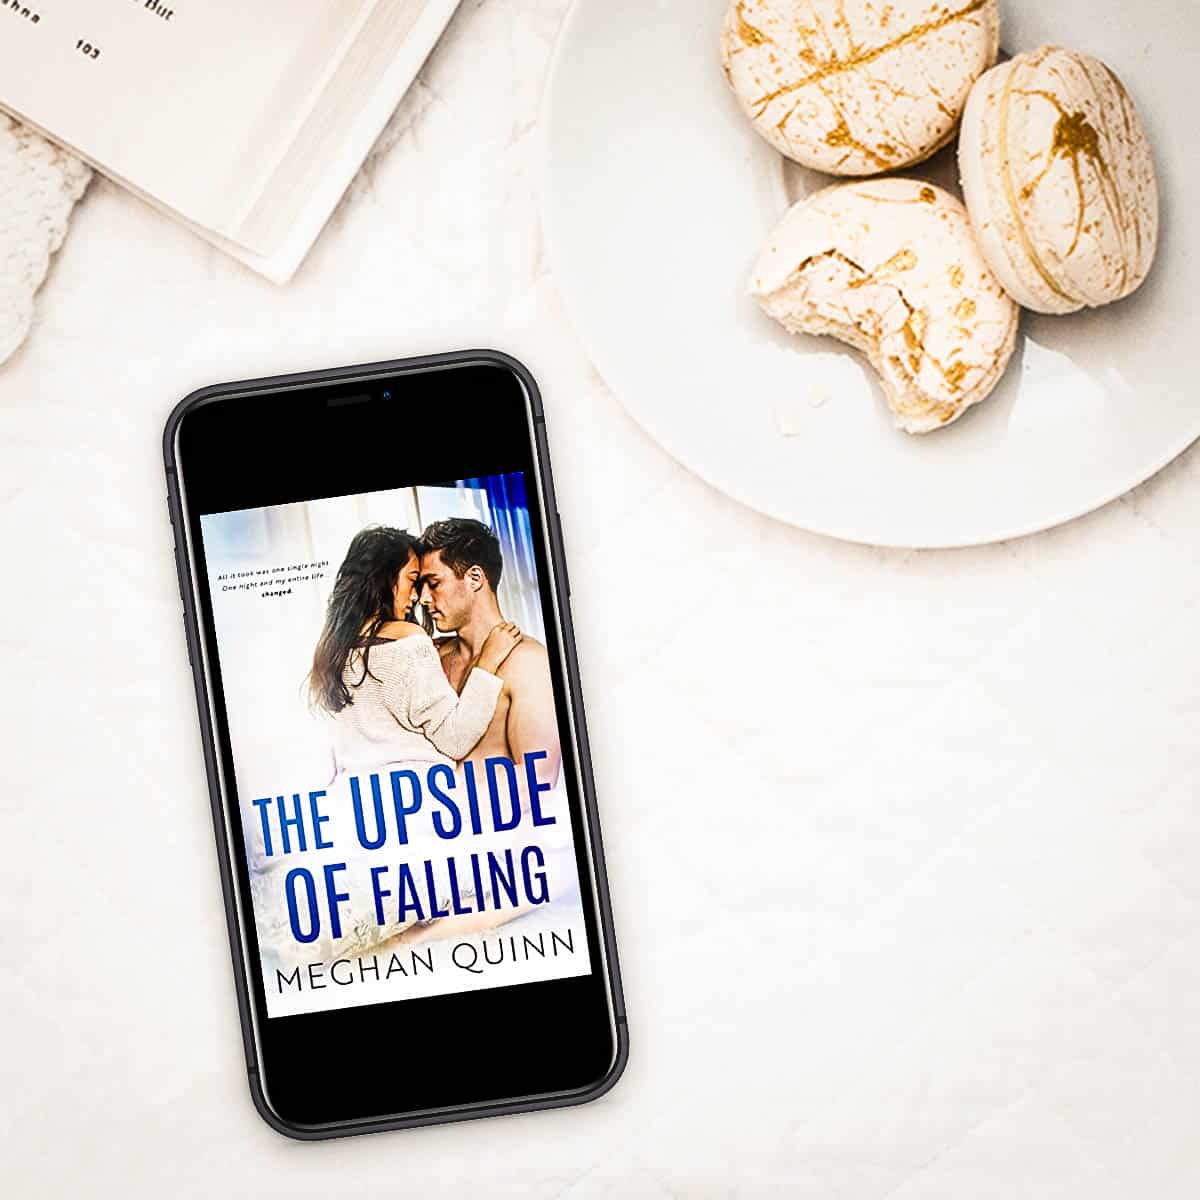 The Upside of Falling by Meghan Quinn is part one of an emotional and sweet slow-burn military romance between star-crossed lovers whose relationship has an unavoidable expiration date.